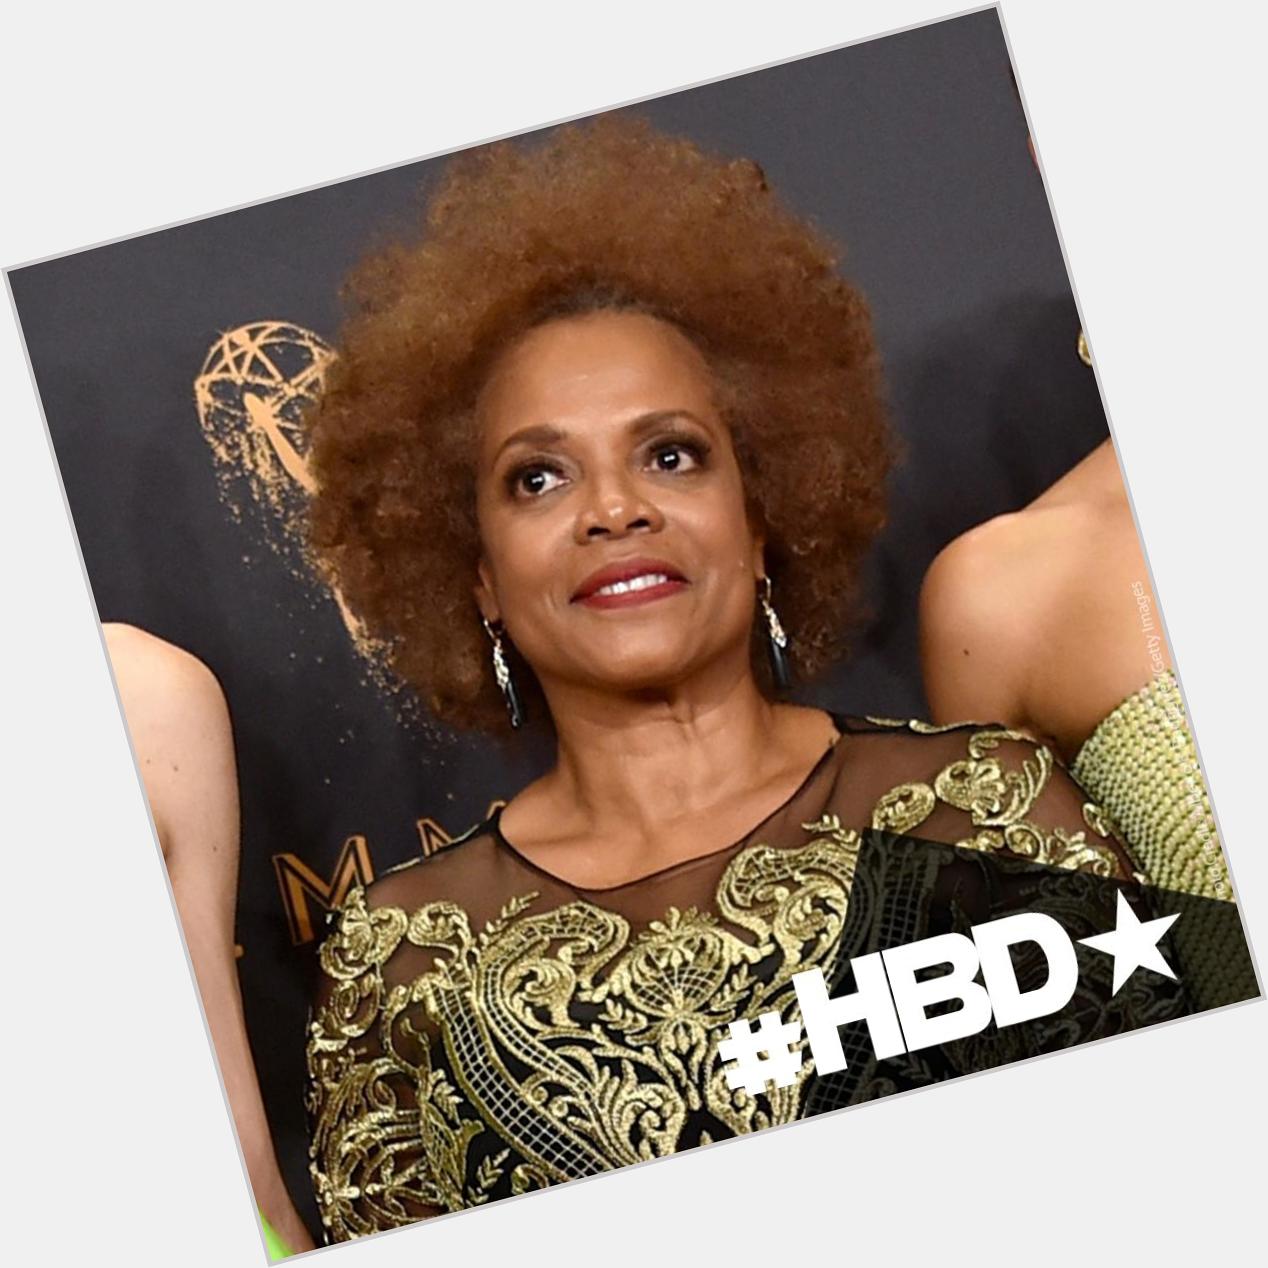 We would like to wish the talented actress Denise Burse a very HAPPY BIRTHDAY! 